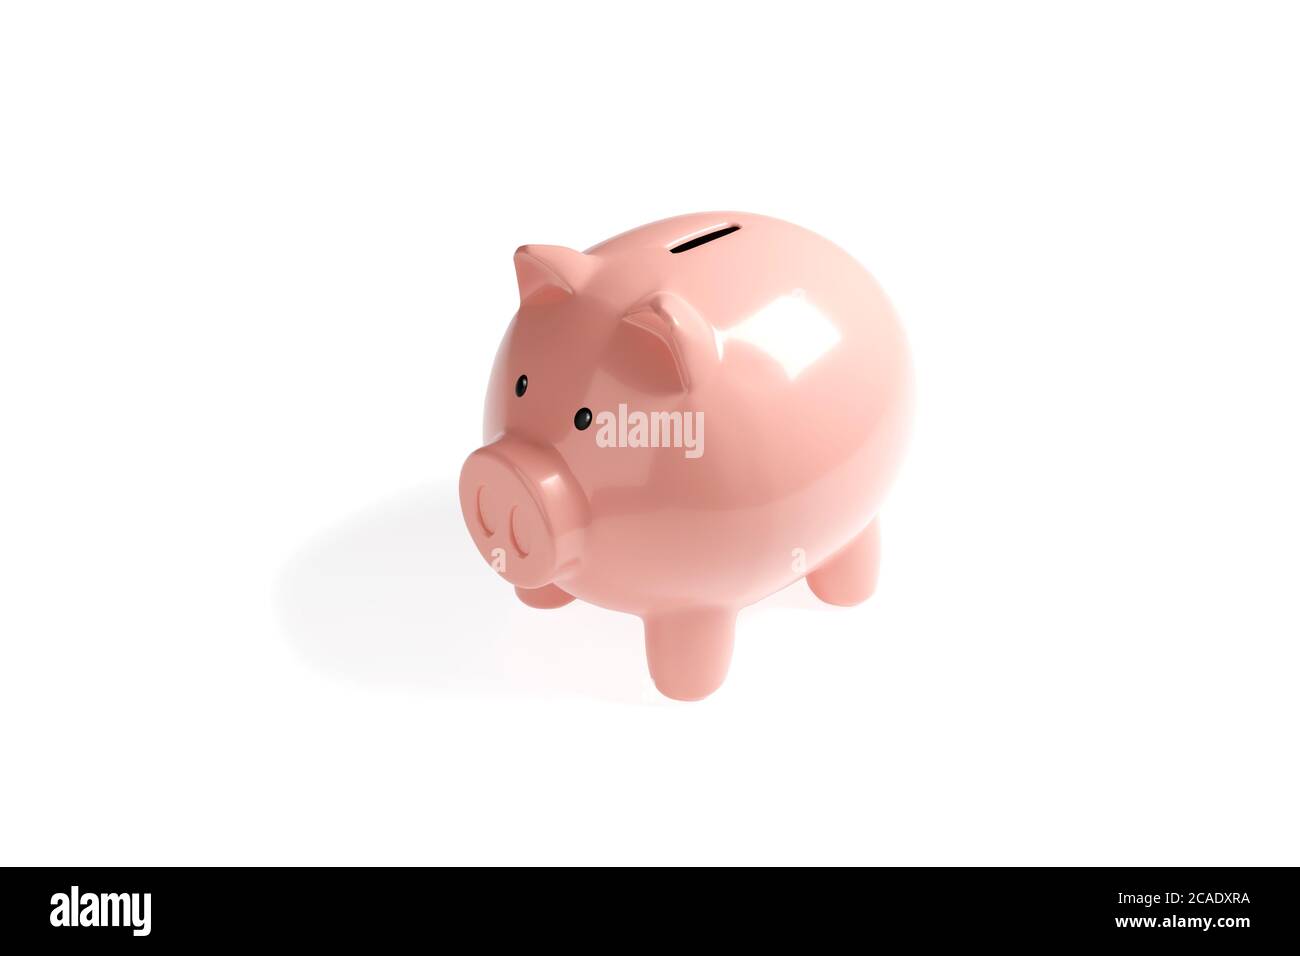 Piggy bank isolated on white background. Savings concept. 3d illustration. Stock Photo